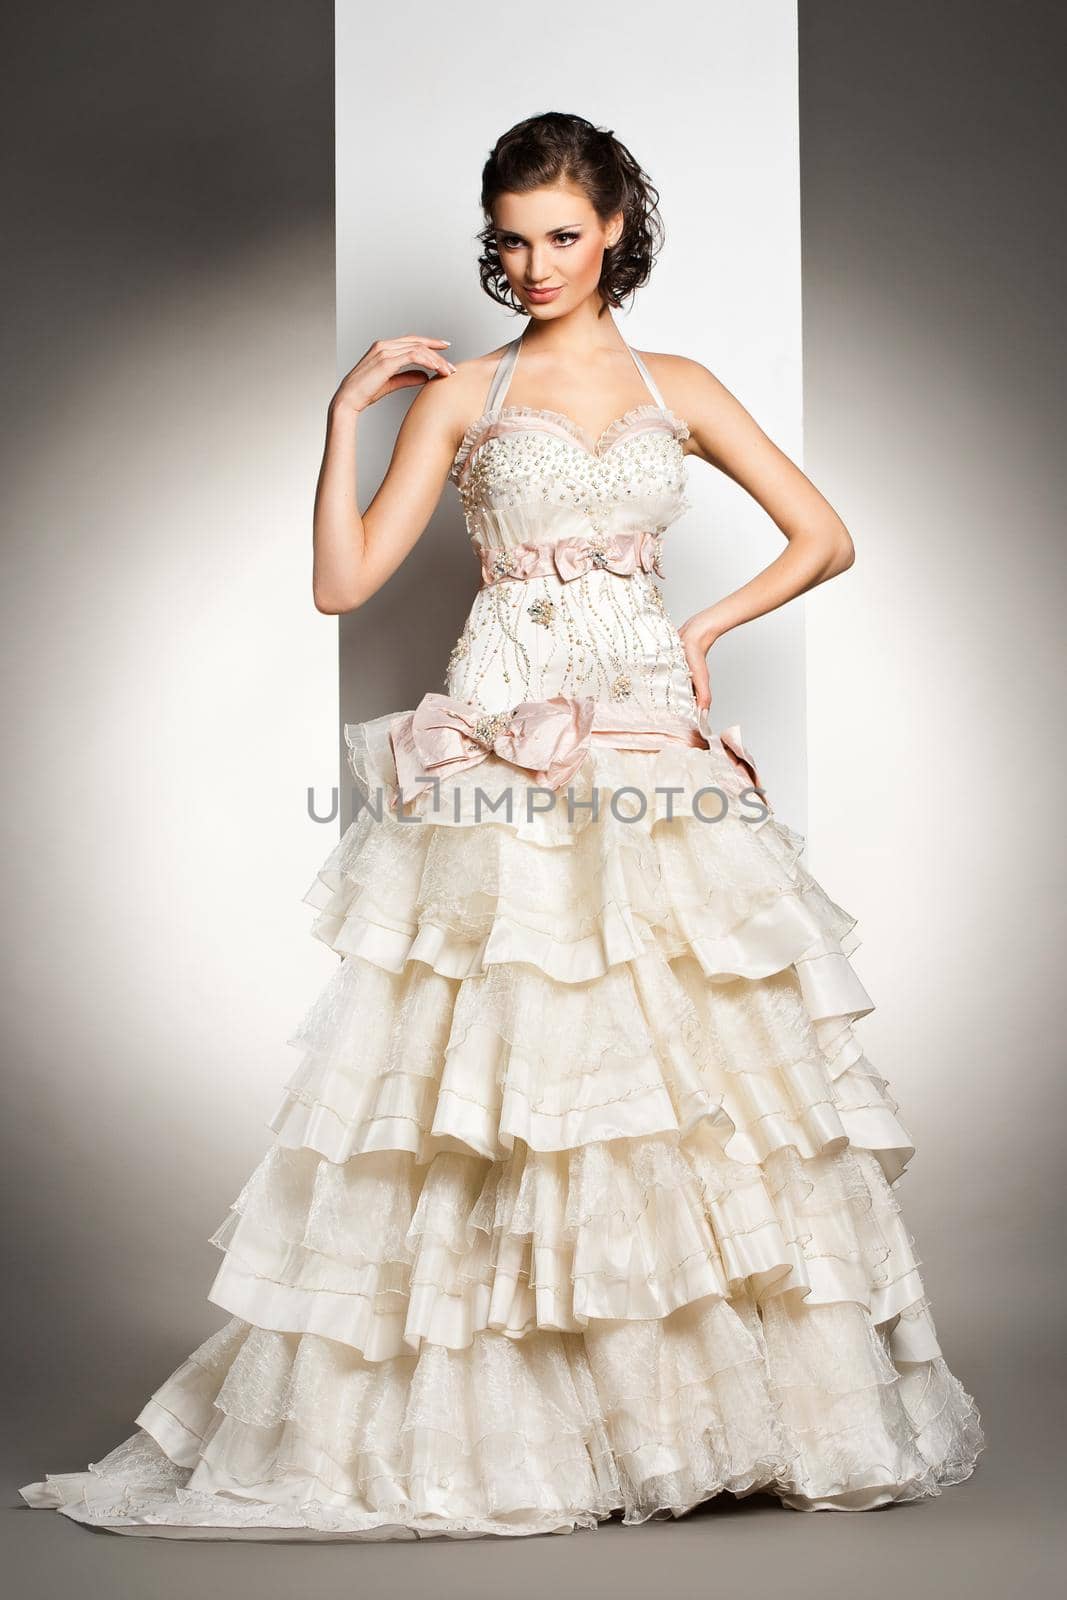 The beautiful young woman posing in a wedding dress over grey backround